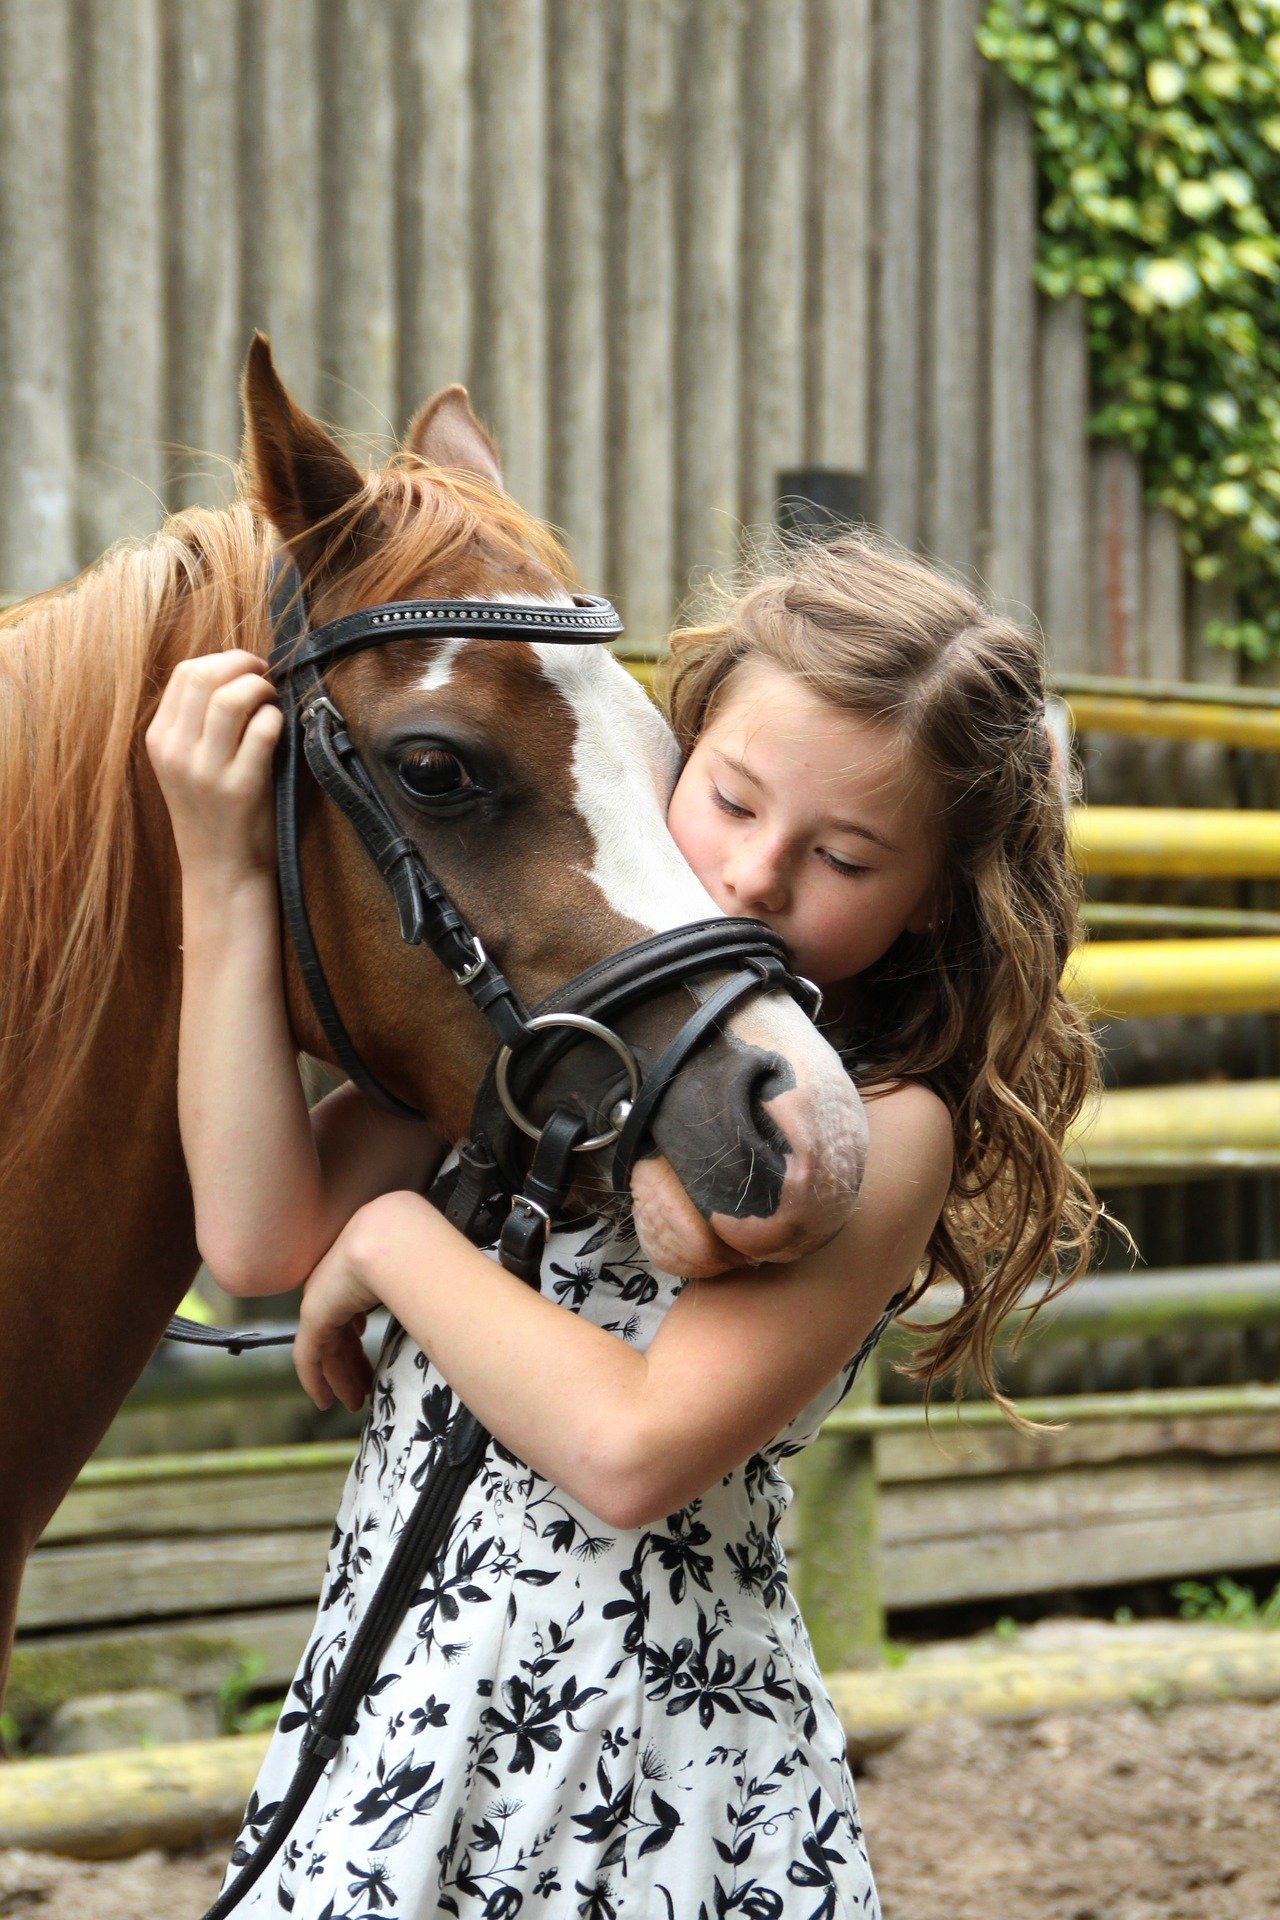 Image of a little girl and horse